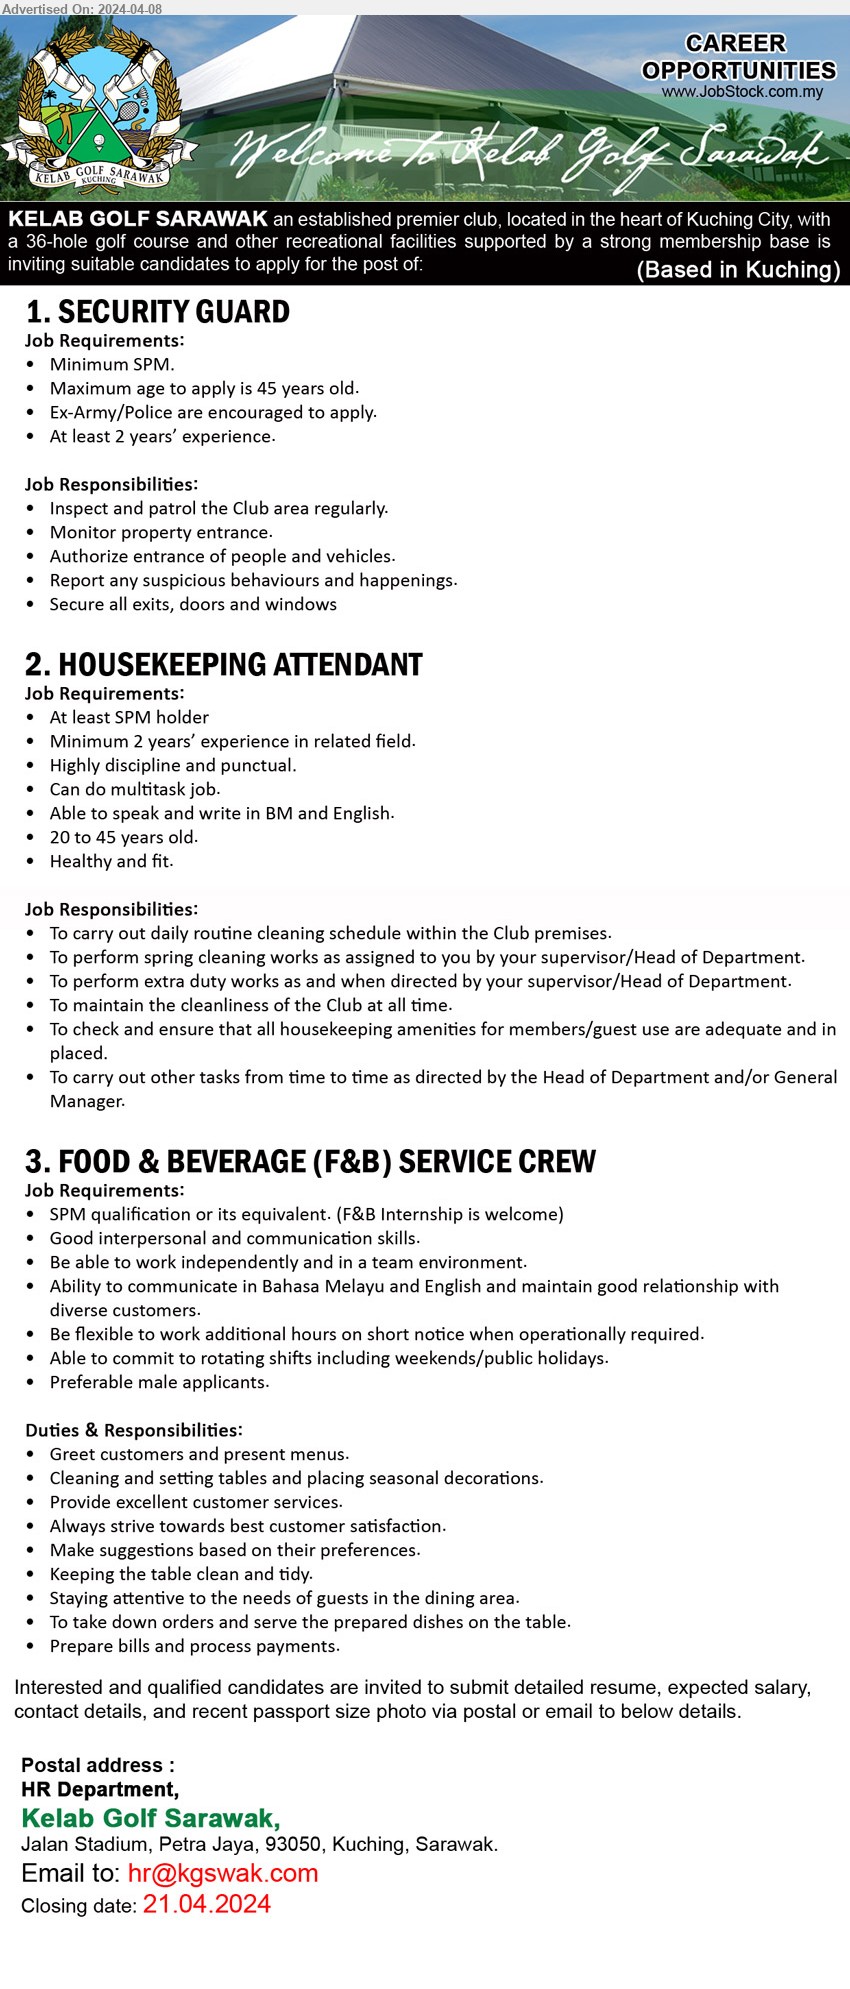 KELAB GOLF SARAWAK - 1. SECURITY GUARD  (Kuching), SPM, Maximum age to apply is 45 years old, Ex-Army/Police are encouraged to apply.,...
2. HOUSEKEEPING ATTENDANT (Kuching), SPM holder, Minimum 2 years’ experience in related field.,...
3. FOOD & BEVERAGE (F&B) SERVICE CREW (Kuching), SPM qualification or its equivalent. (F&B Internship is welcome),...
Email resume to ...